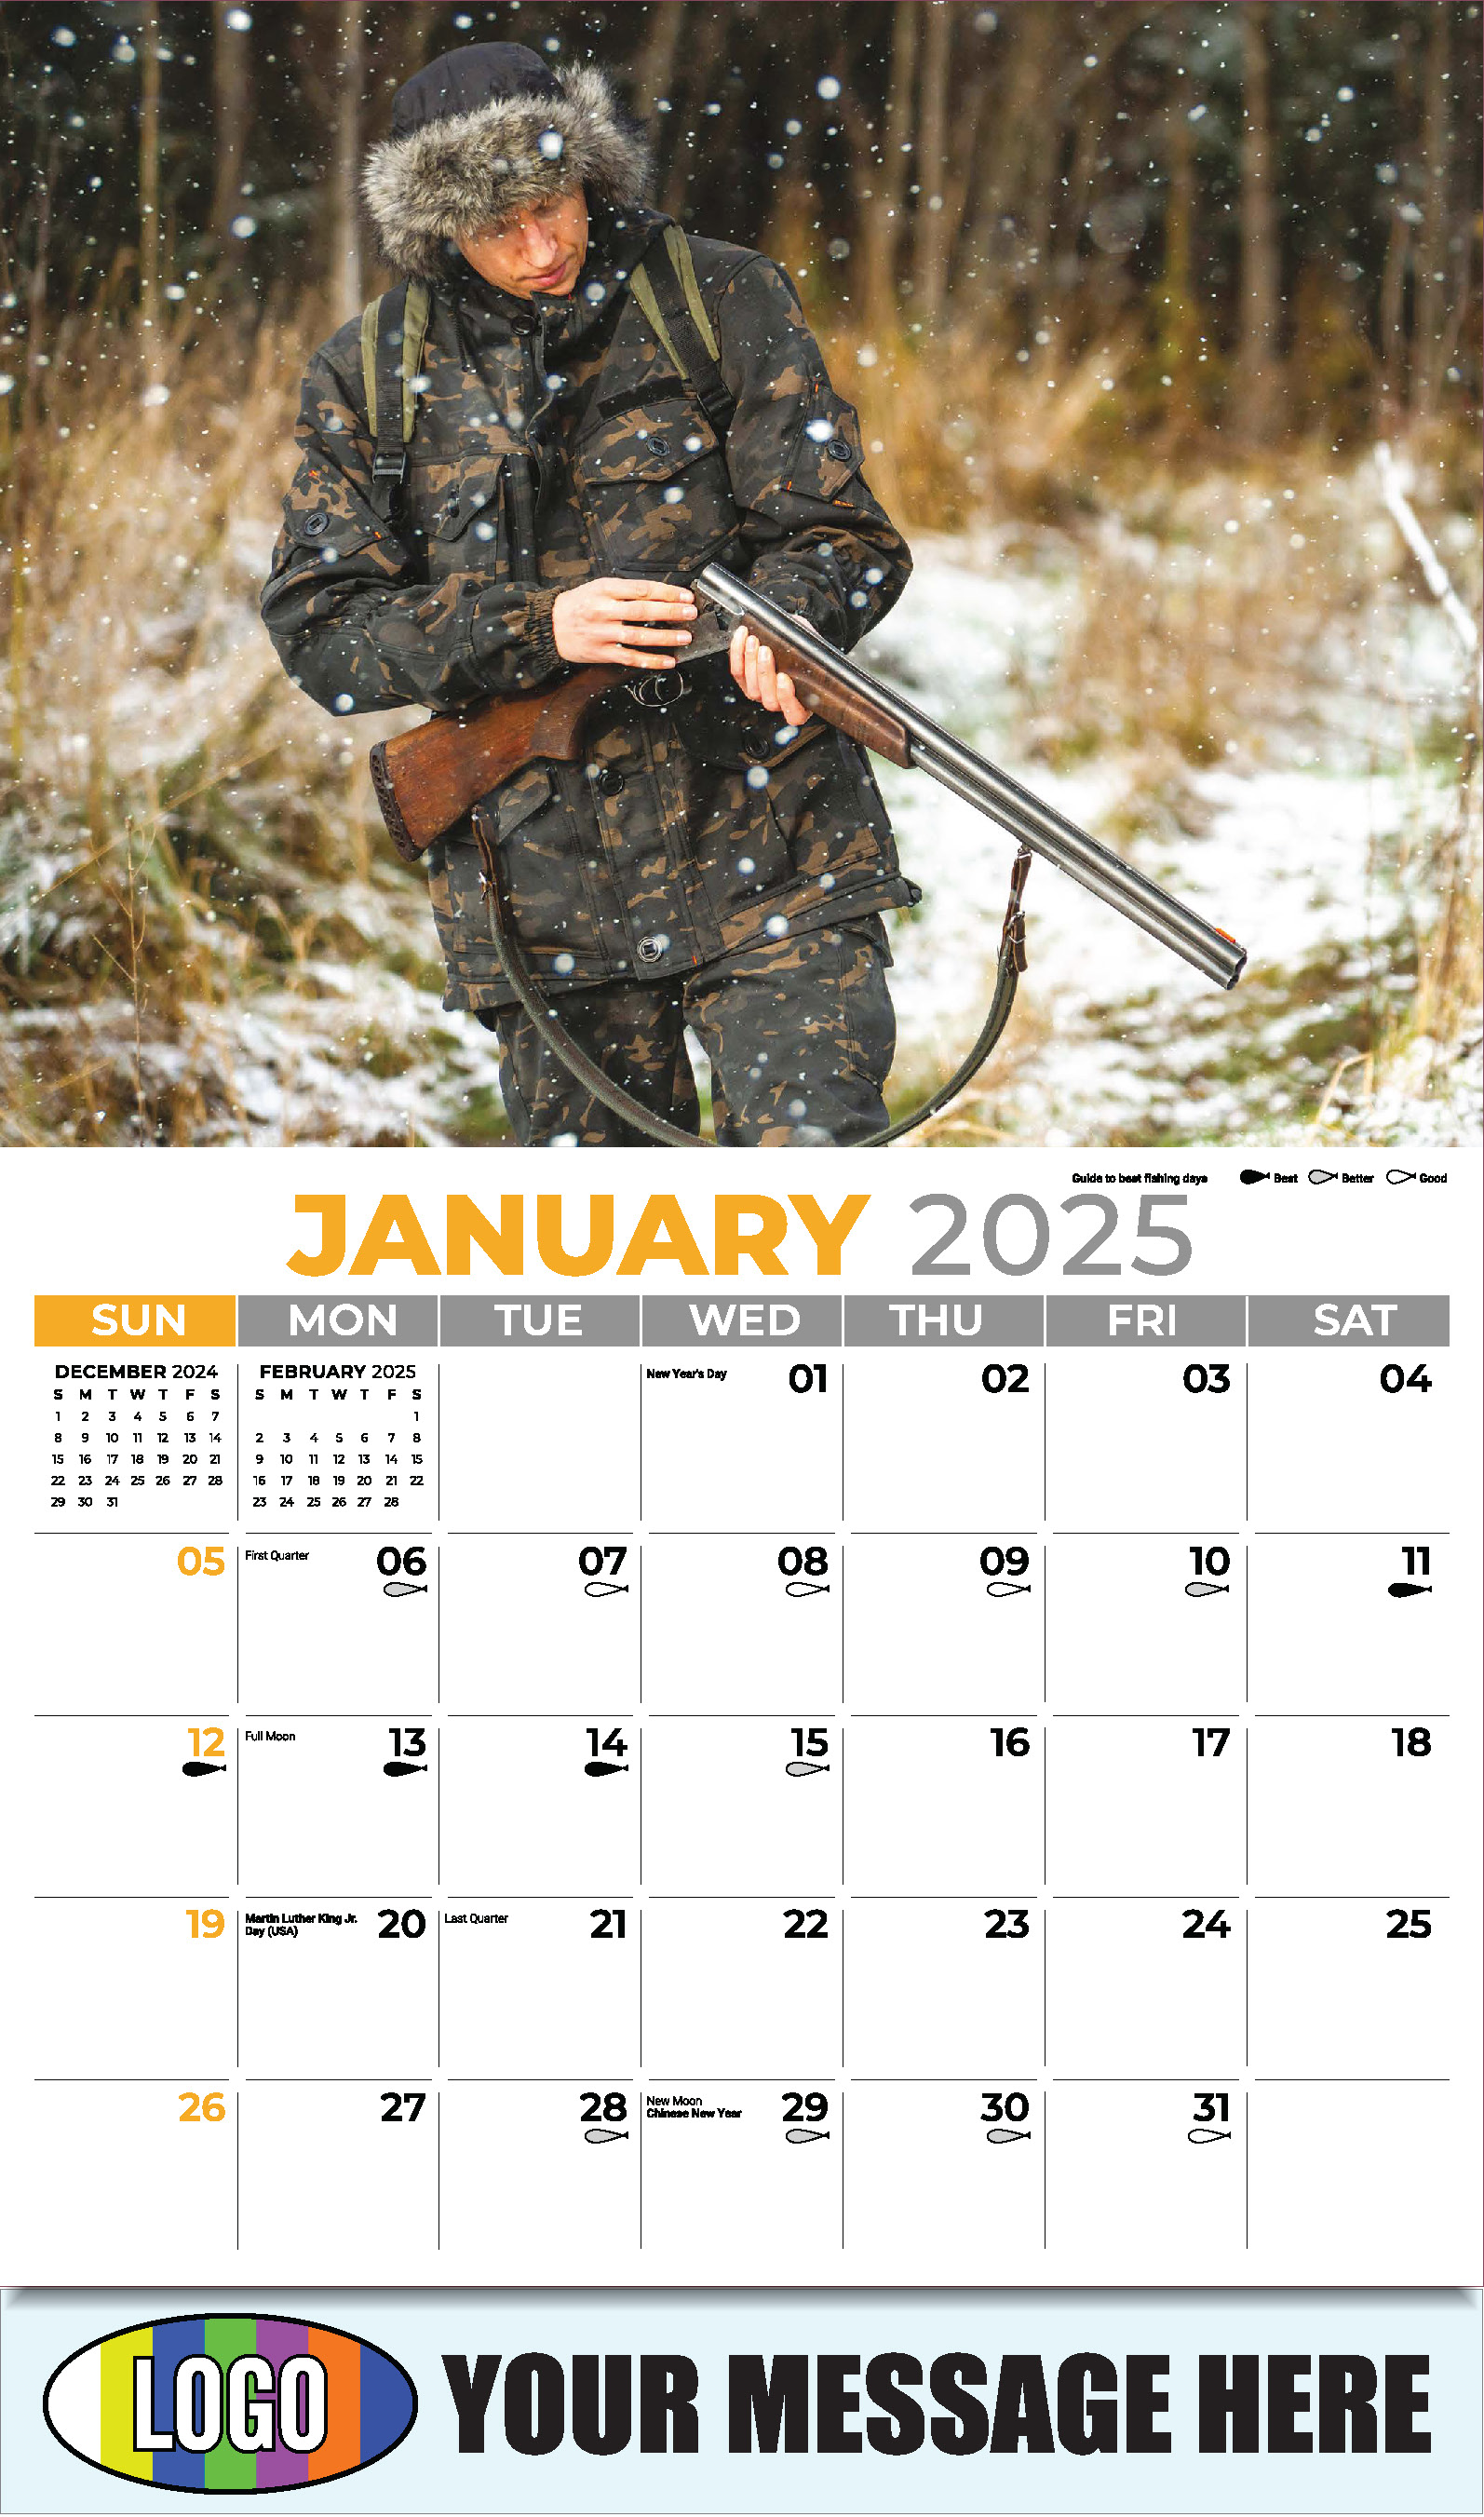 2025 Promotional Advertising Calendar, Fishing and Hunting